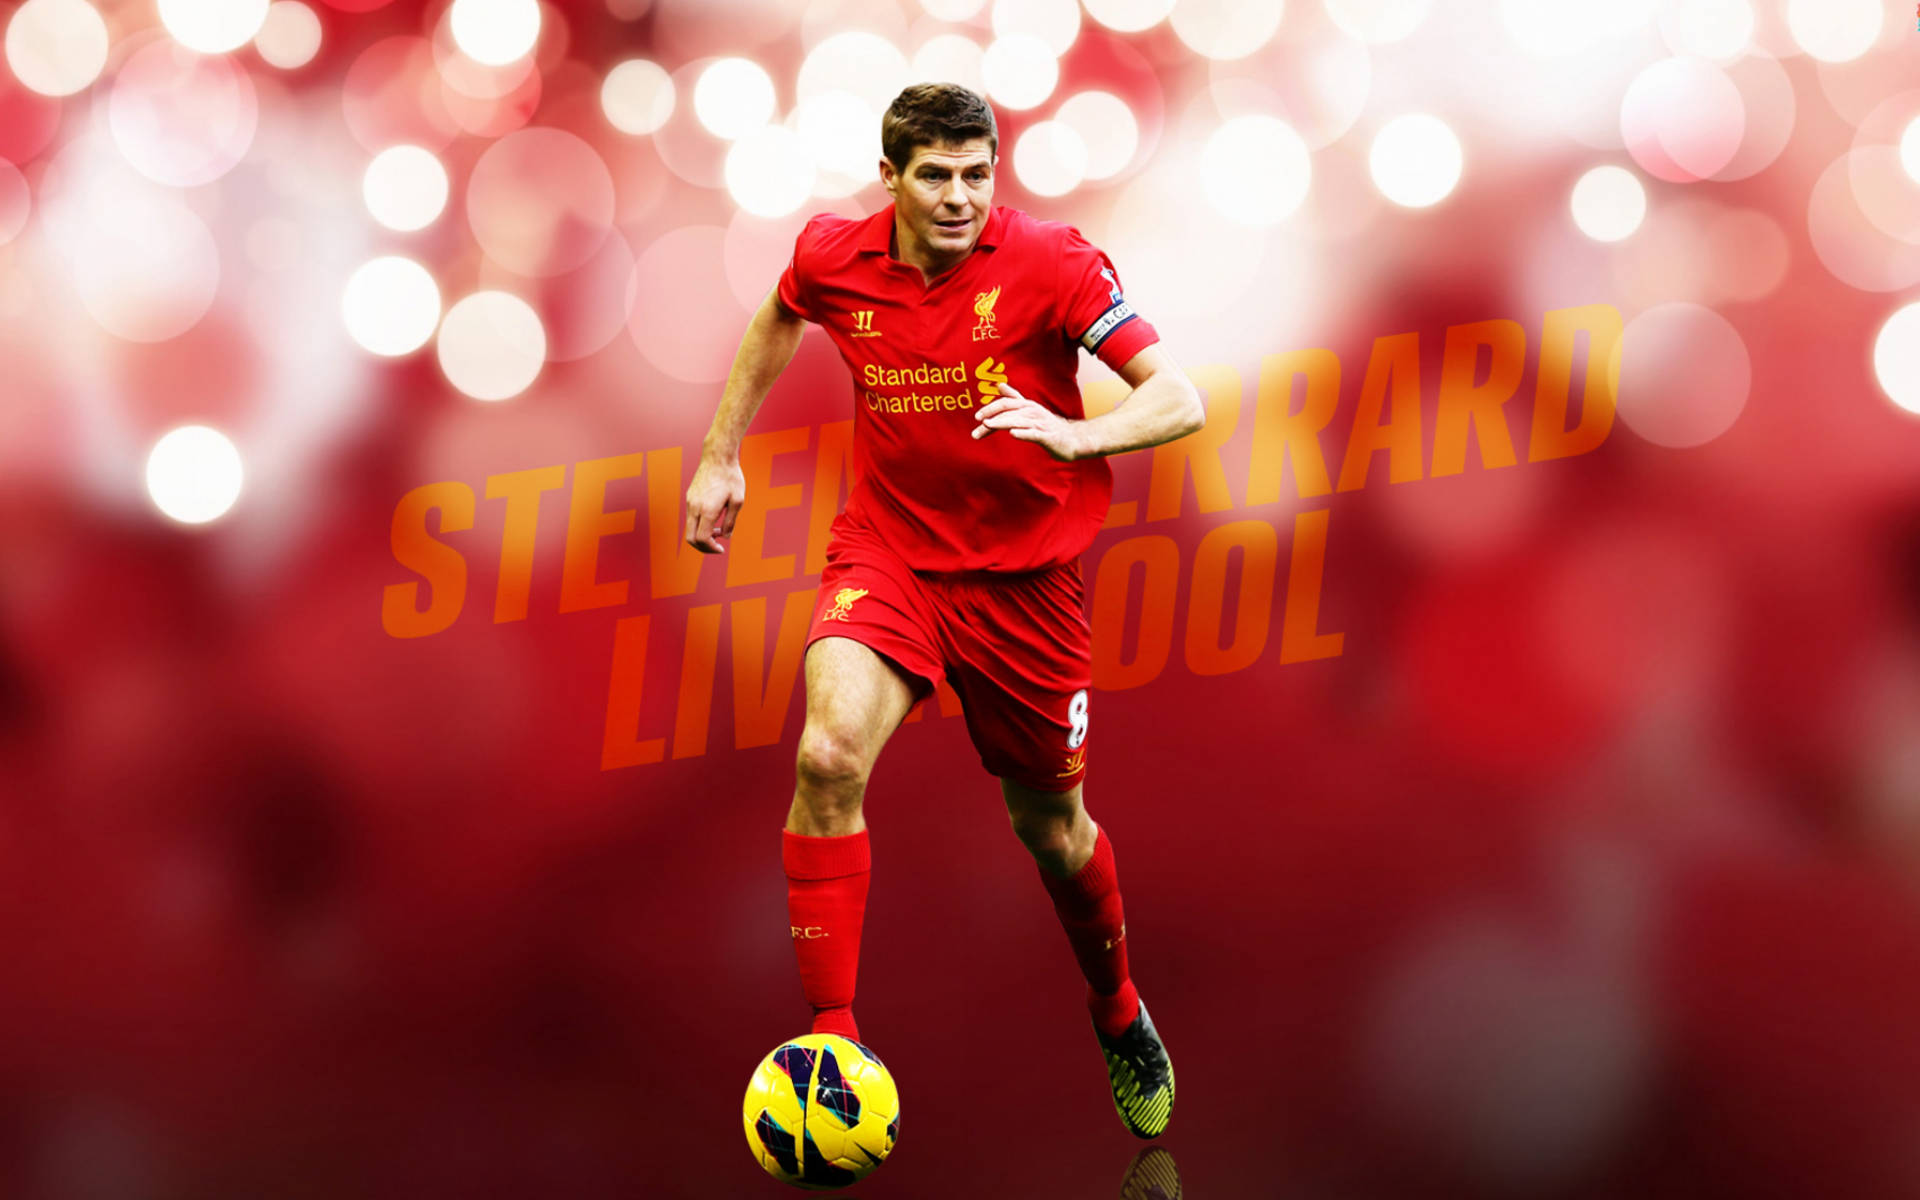 Steven Gerrard In Action During A Liverpool Football Club Match Background